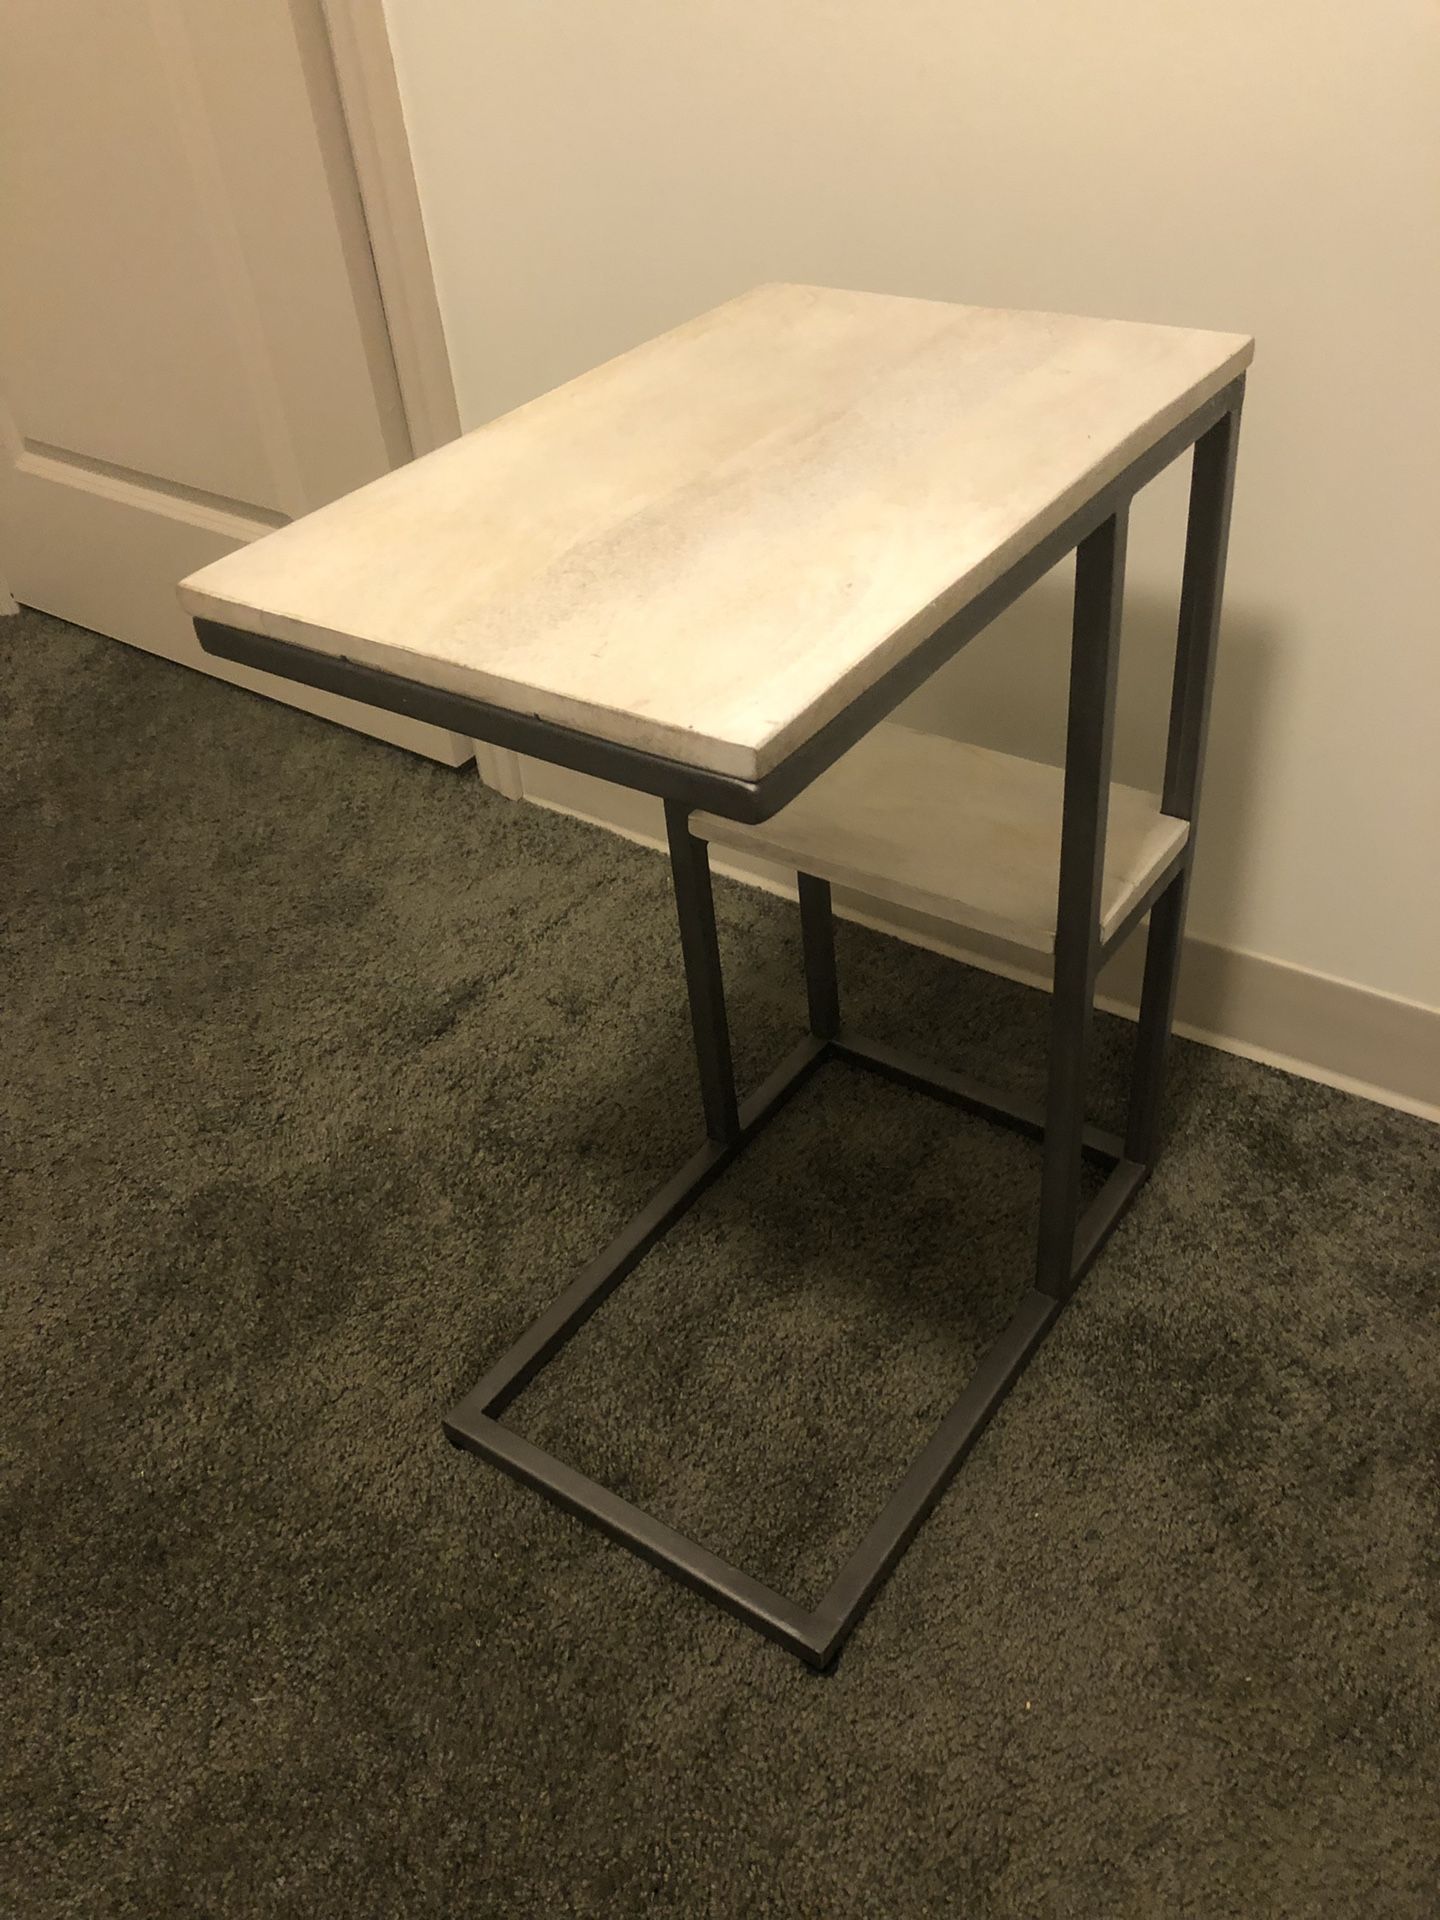 End table, side table, night stand